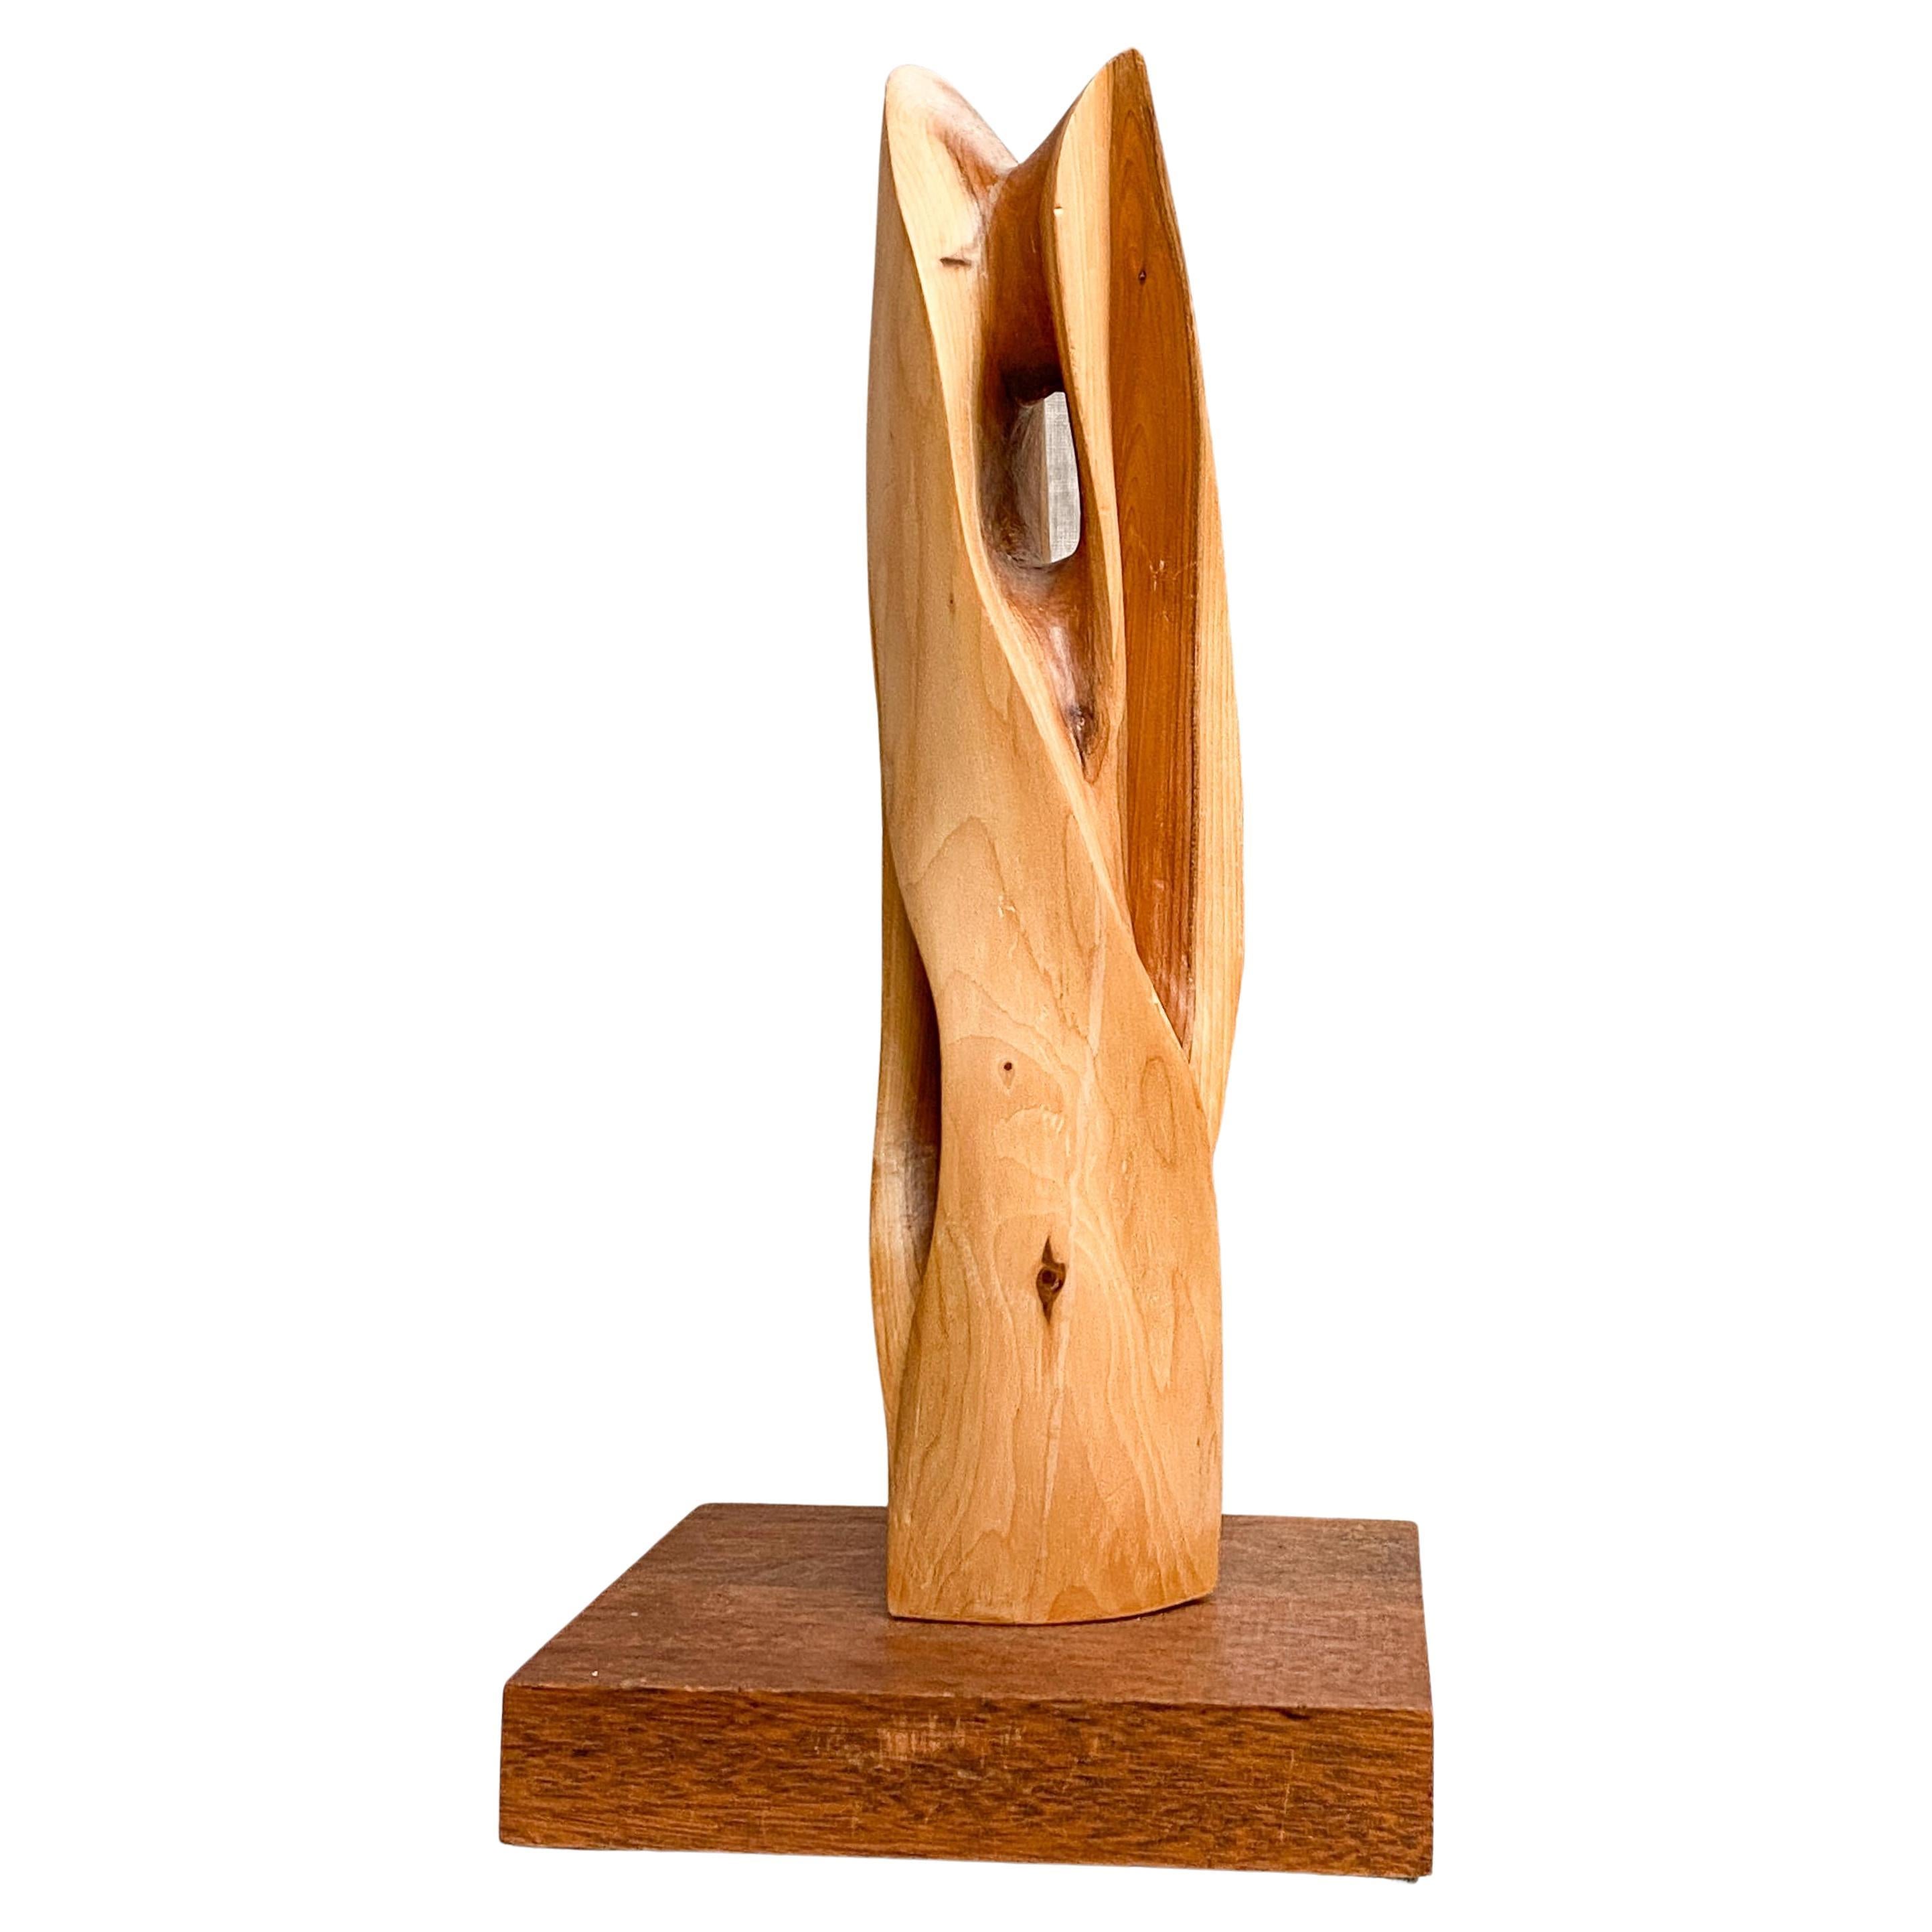 Modernist Wooden Sculpture in Abstract Intricate TOTEM Shape on a Wooden Base For Sale